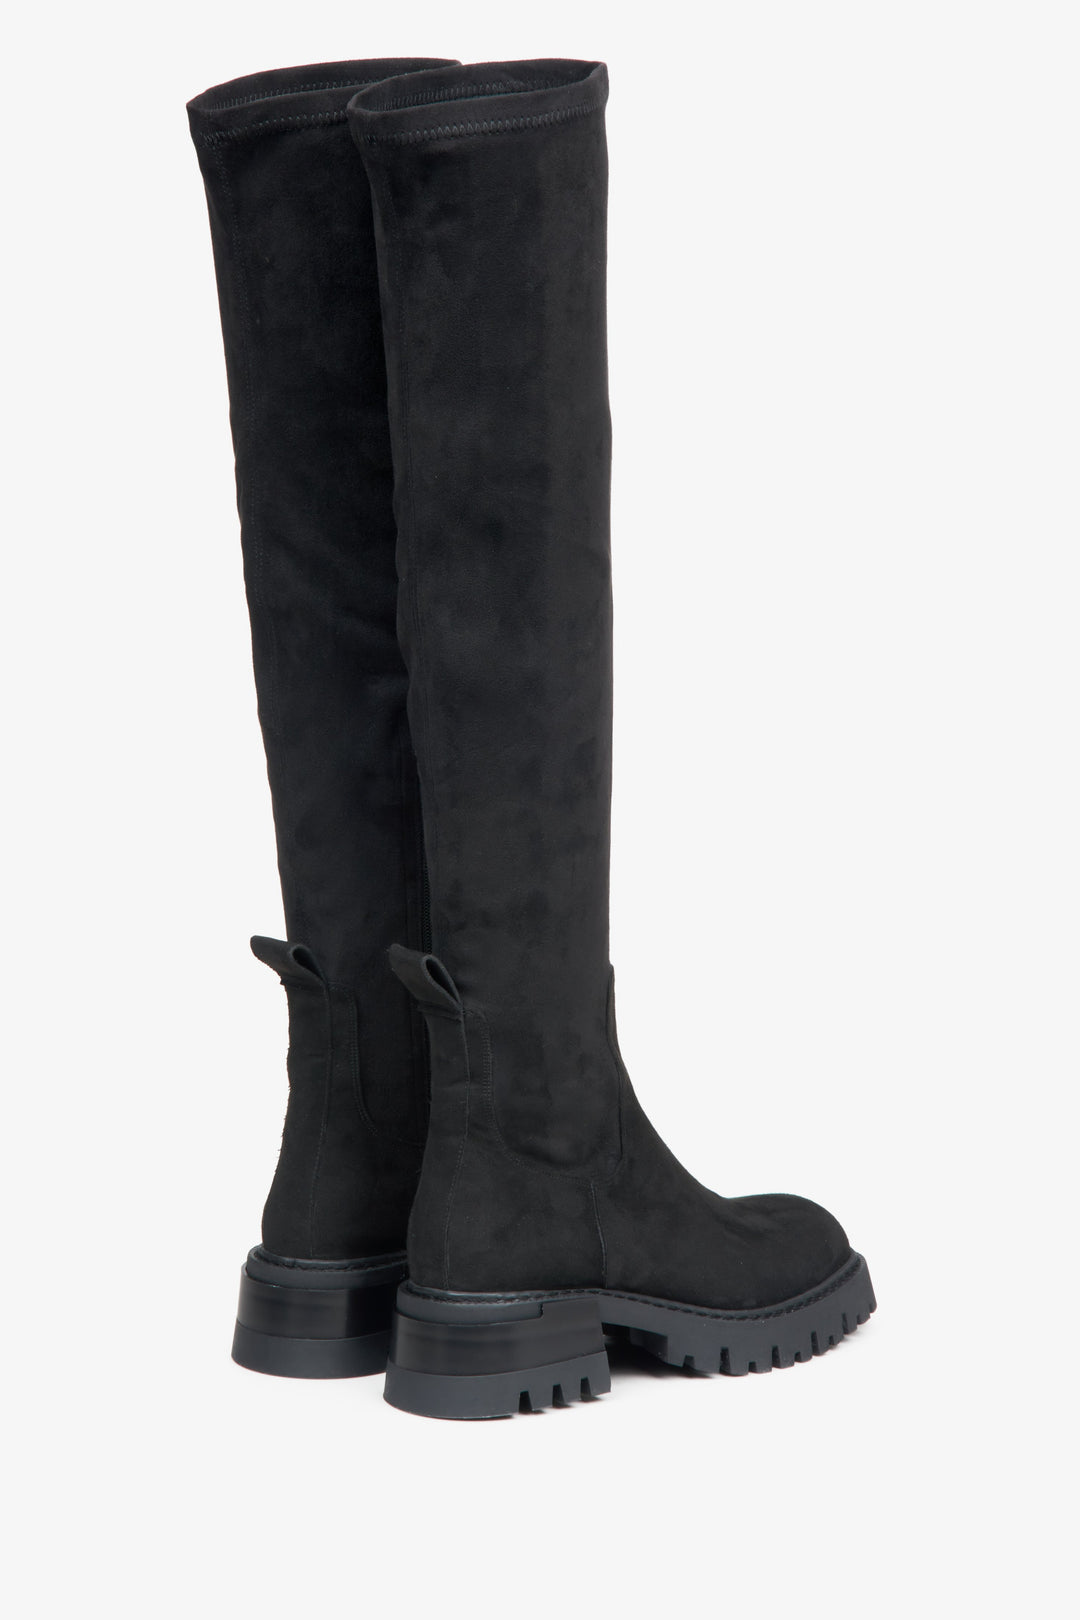 Women's black velour boots by Estro - close-up on the back.